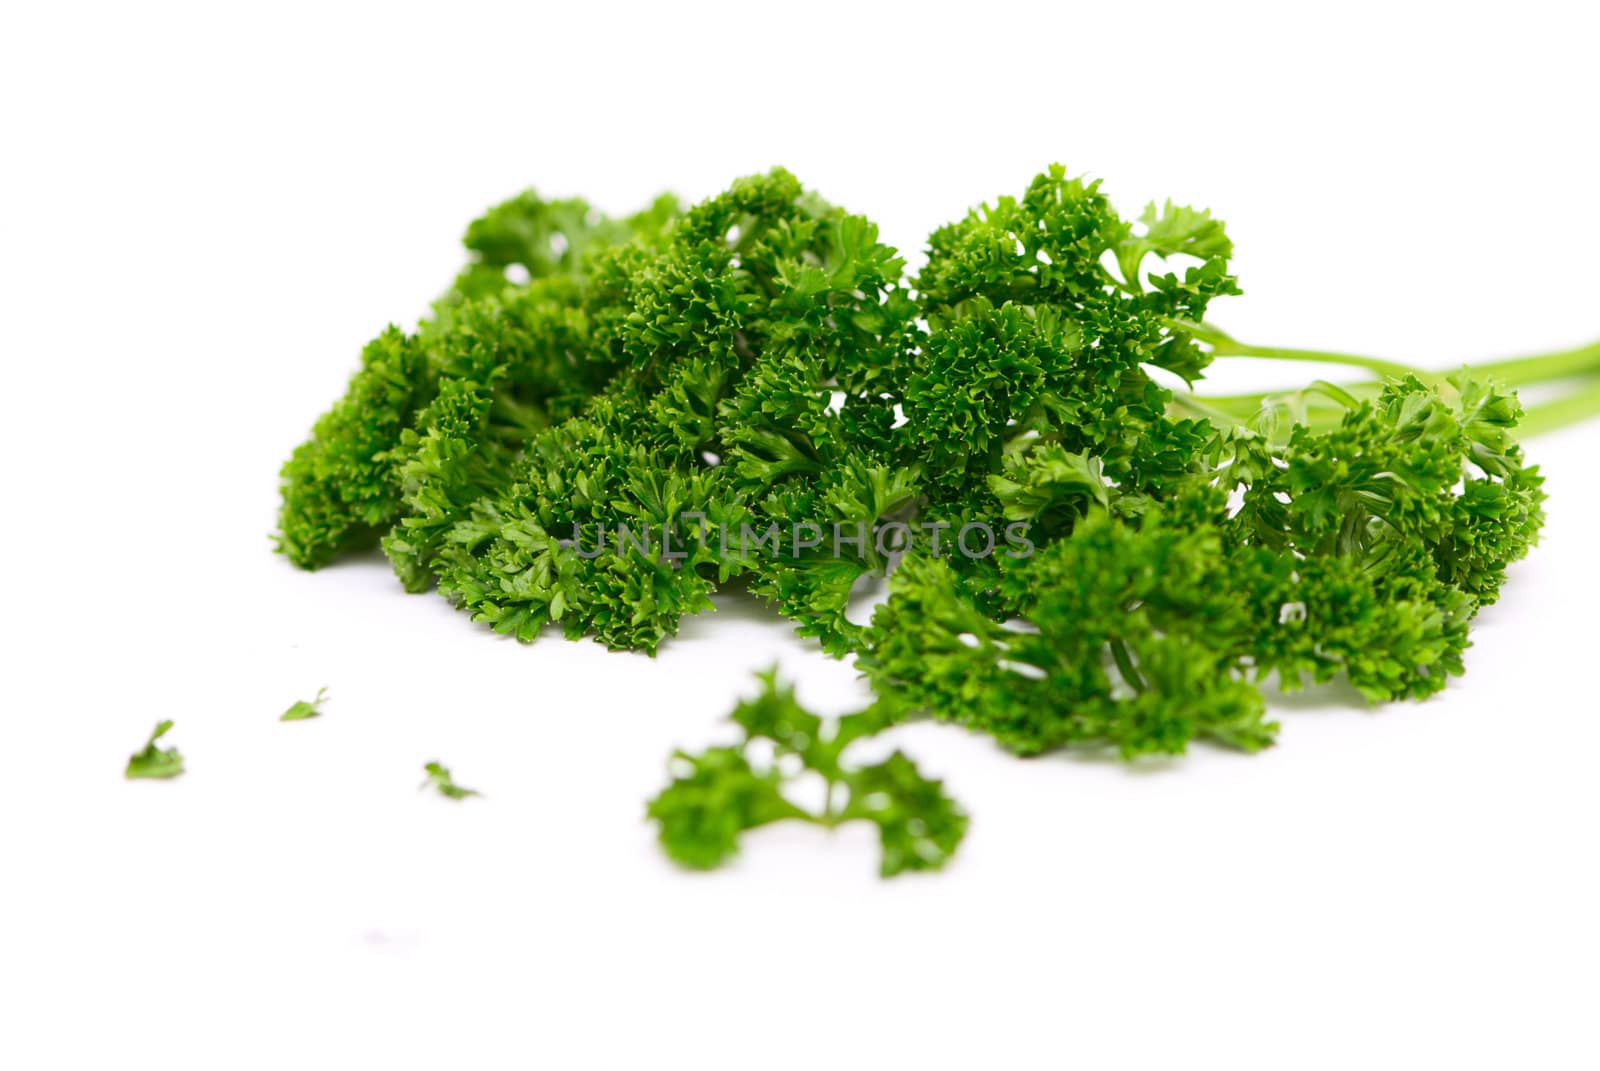 Twig of a green parsley isolated on white